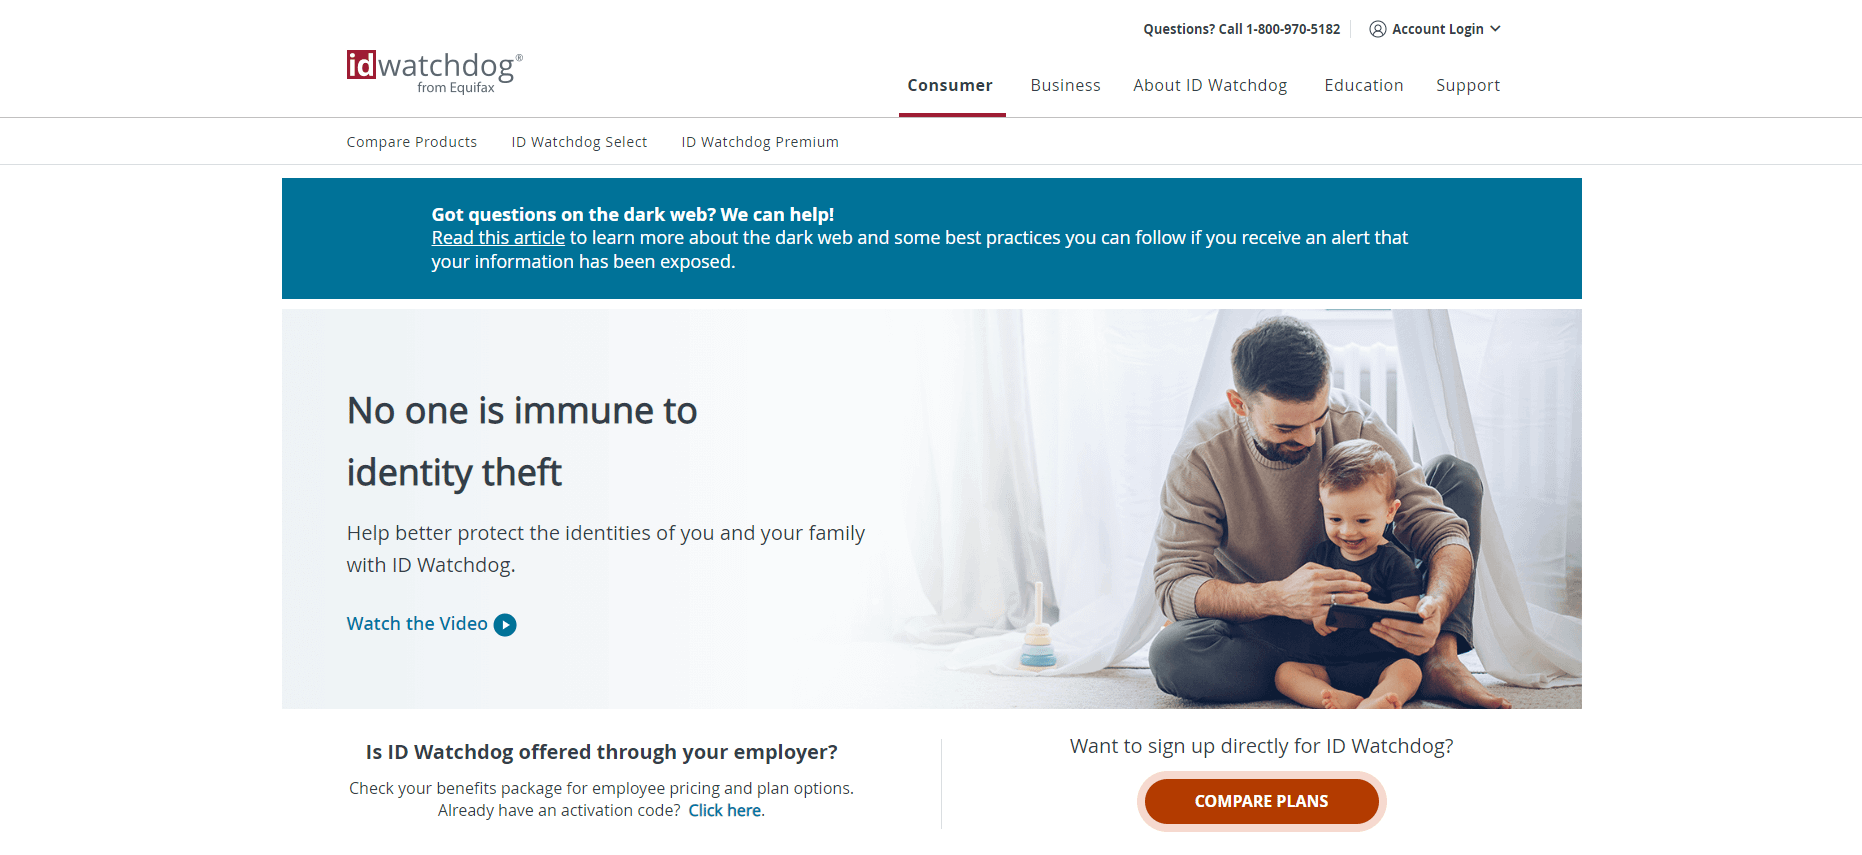 ID Watchdog from Equifax homepage